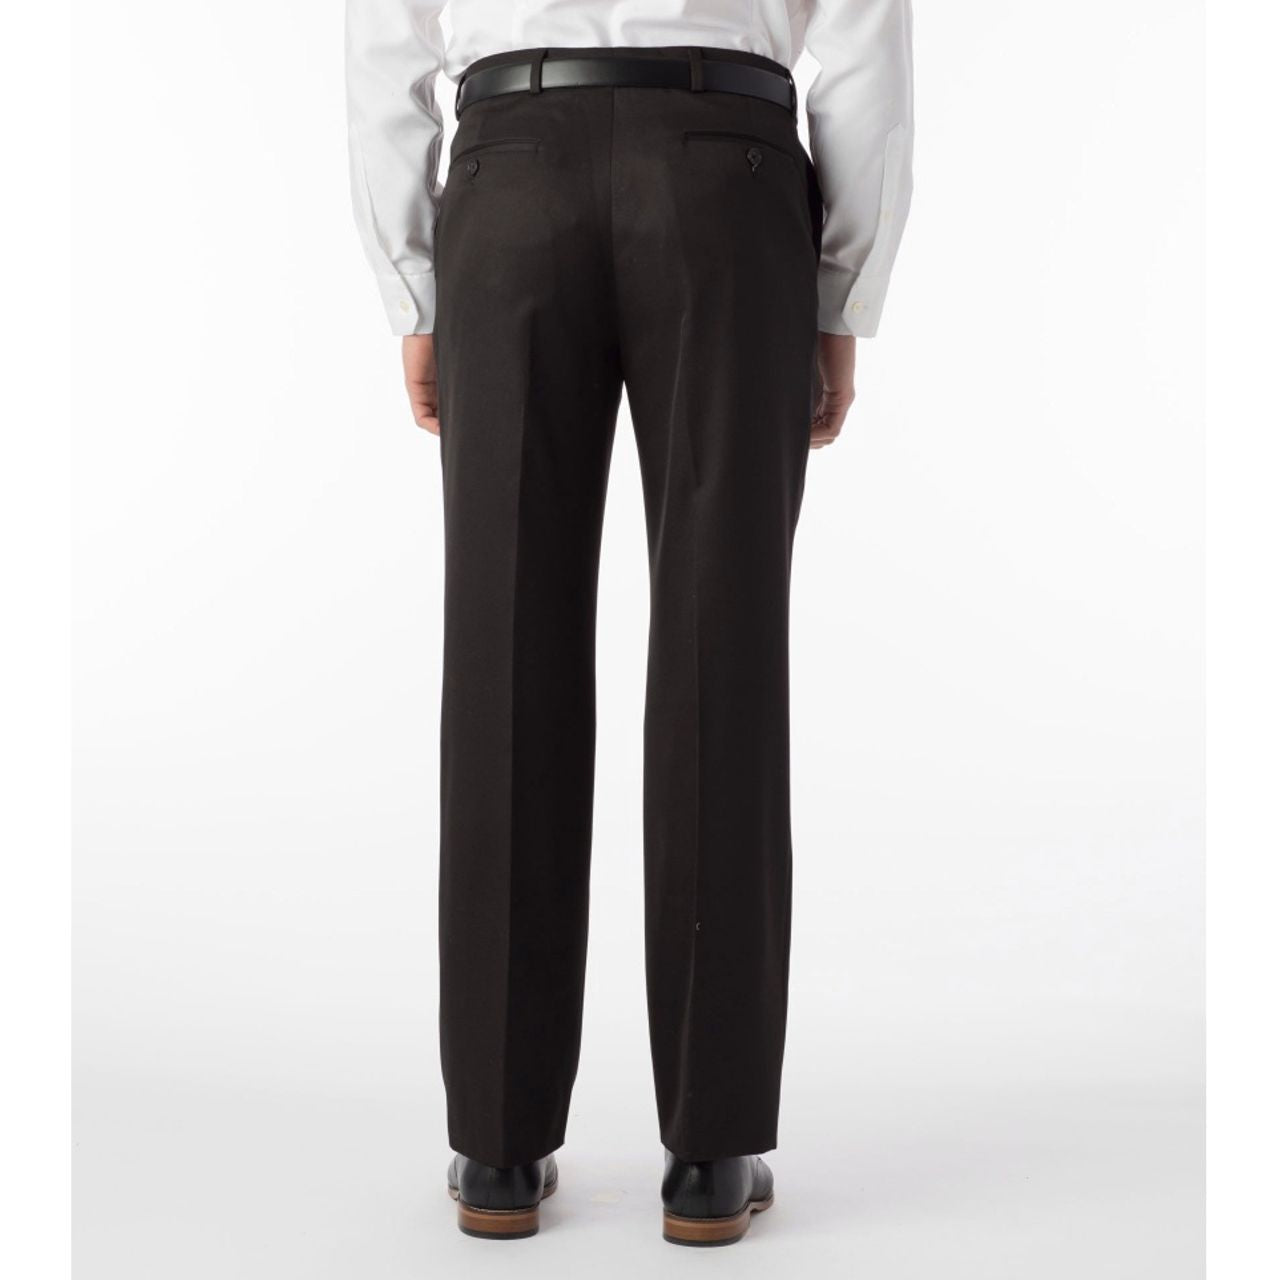 Comfort-EZE Micro Nano Performance Gabardine Trouser in Black (Dunhill Traditional Fit) by Ballin